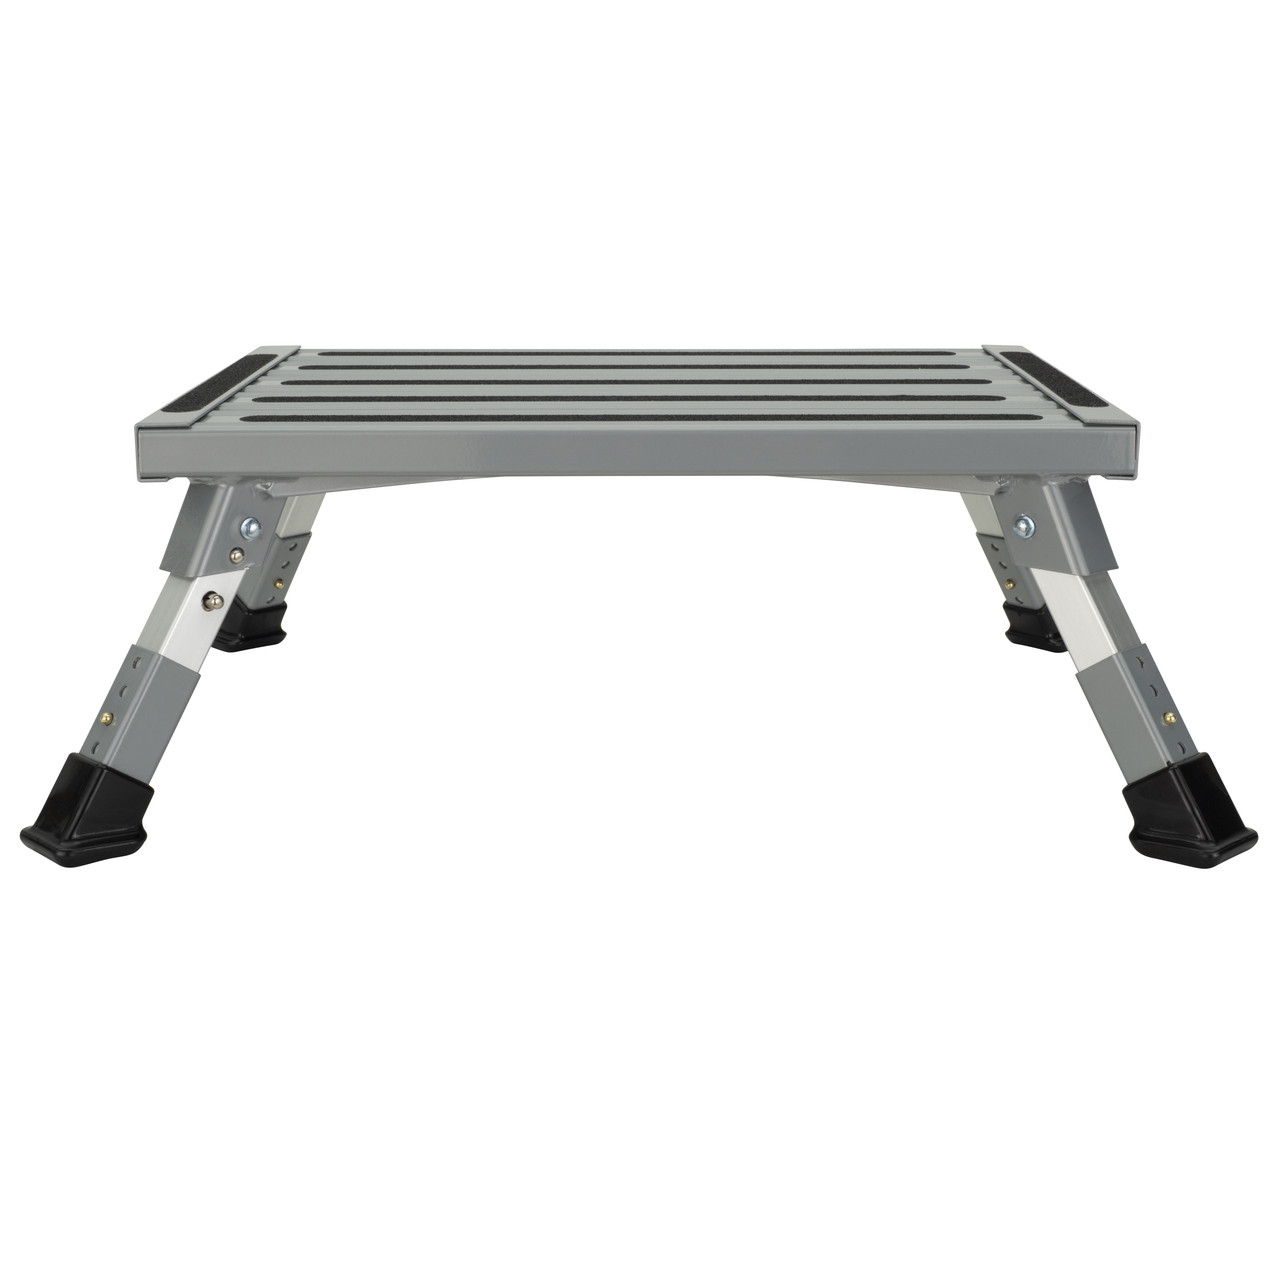 RecPro Aluminum RV Step with Adjustable Height - RecPro